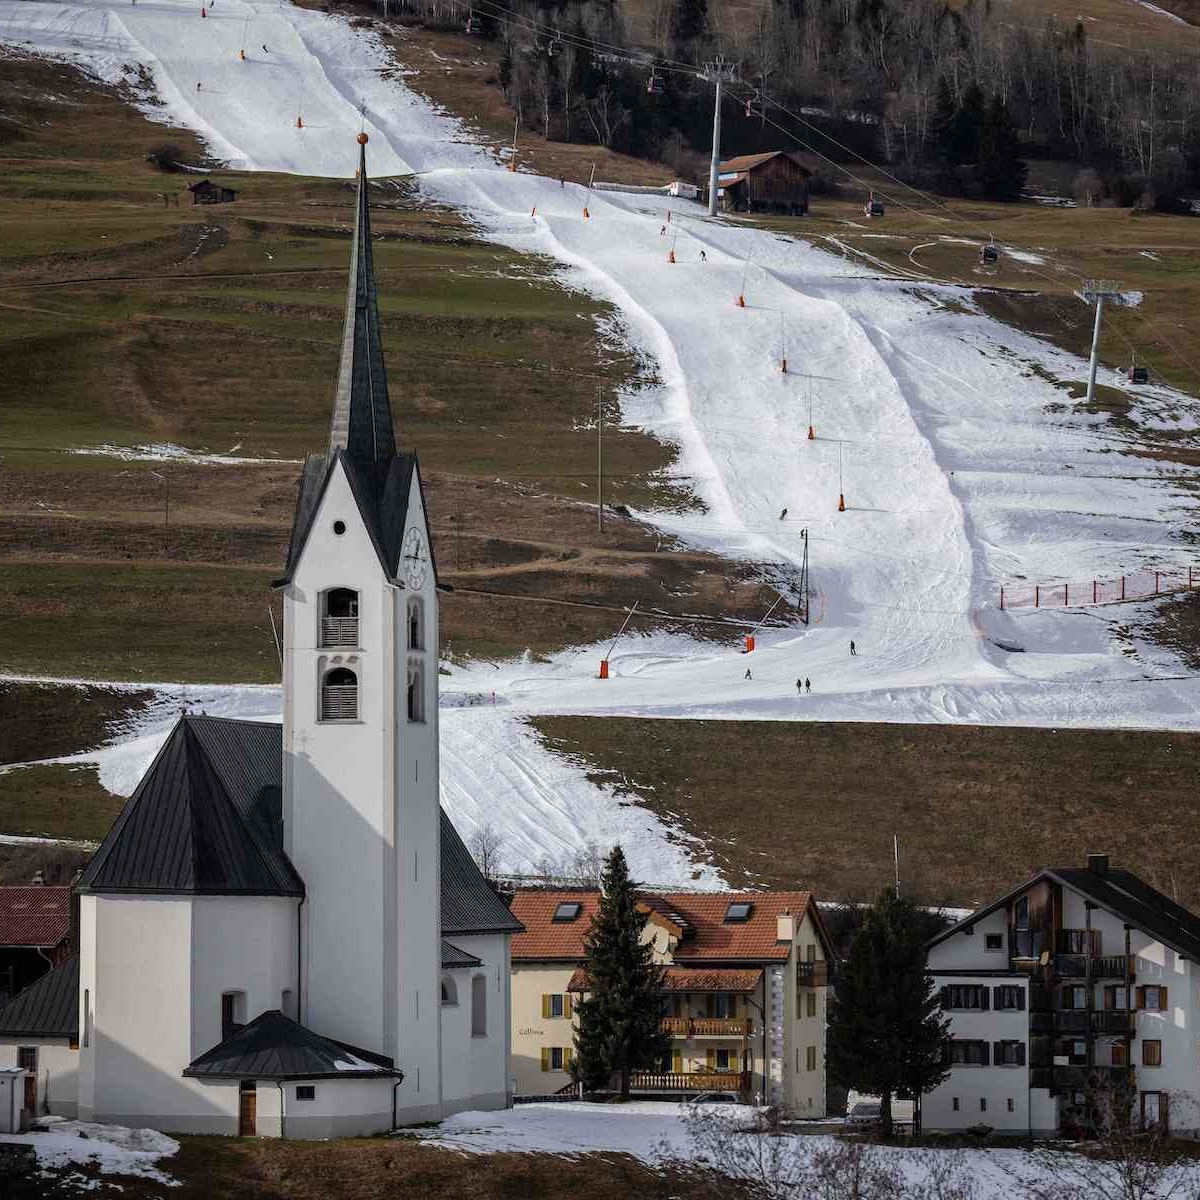 A ski slope made by snow machine is seen in the Swiss Alpine resort of Savognin on December 30, 2022. - The turnover of Swiss ski lift operators melts at the start of the season, with mild weather in the Alps, showing a drop of around 9% compared to the previous year, said on January 4, 2023  the professional organization which represents the interests of the branch. (Photo by Fabrice COFFRINI / AFP) (Photo by FABRICE COFFRINI/AFP via Getty Images)
1245983097
Horizontal